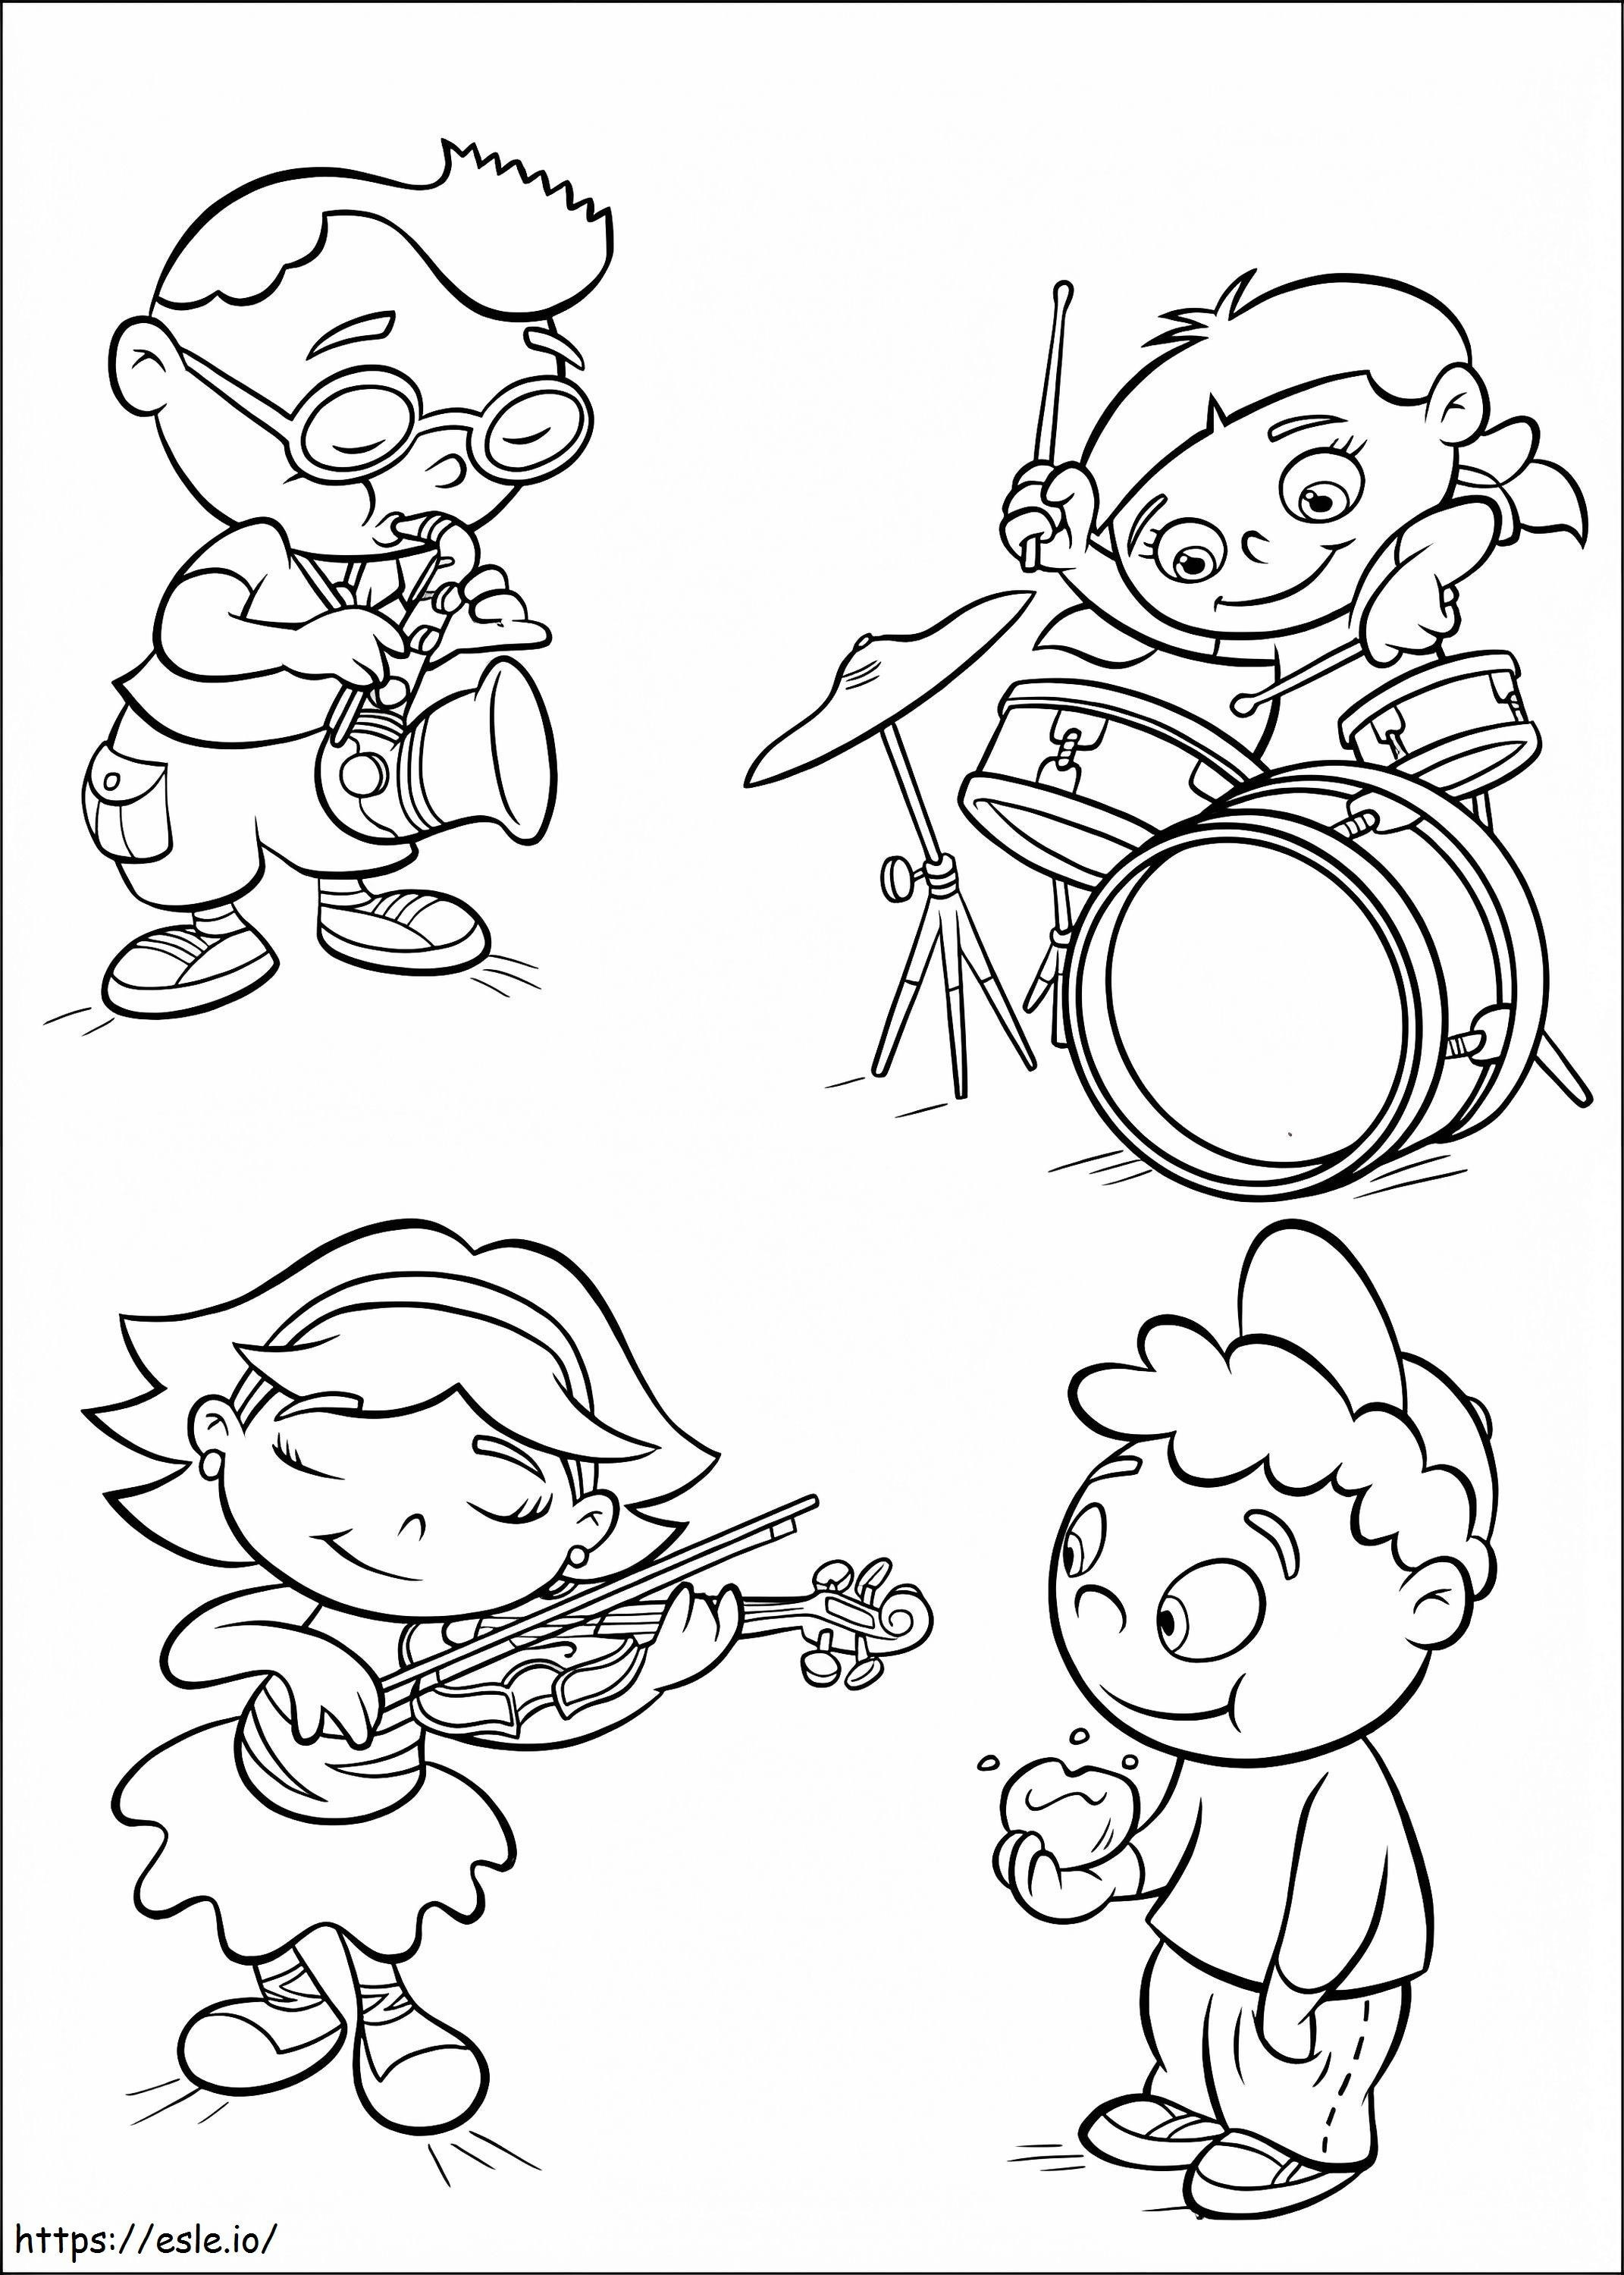 Little Einsteins 7 coloring page